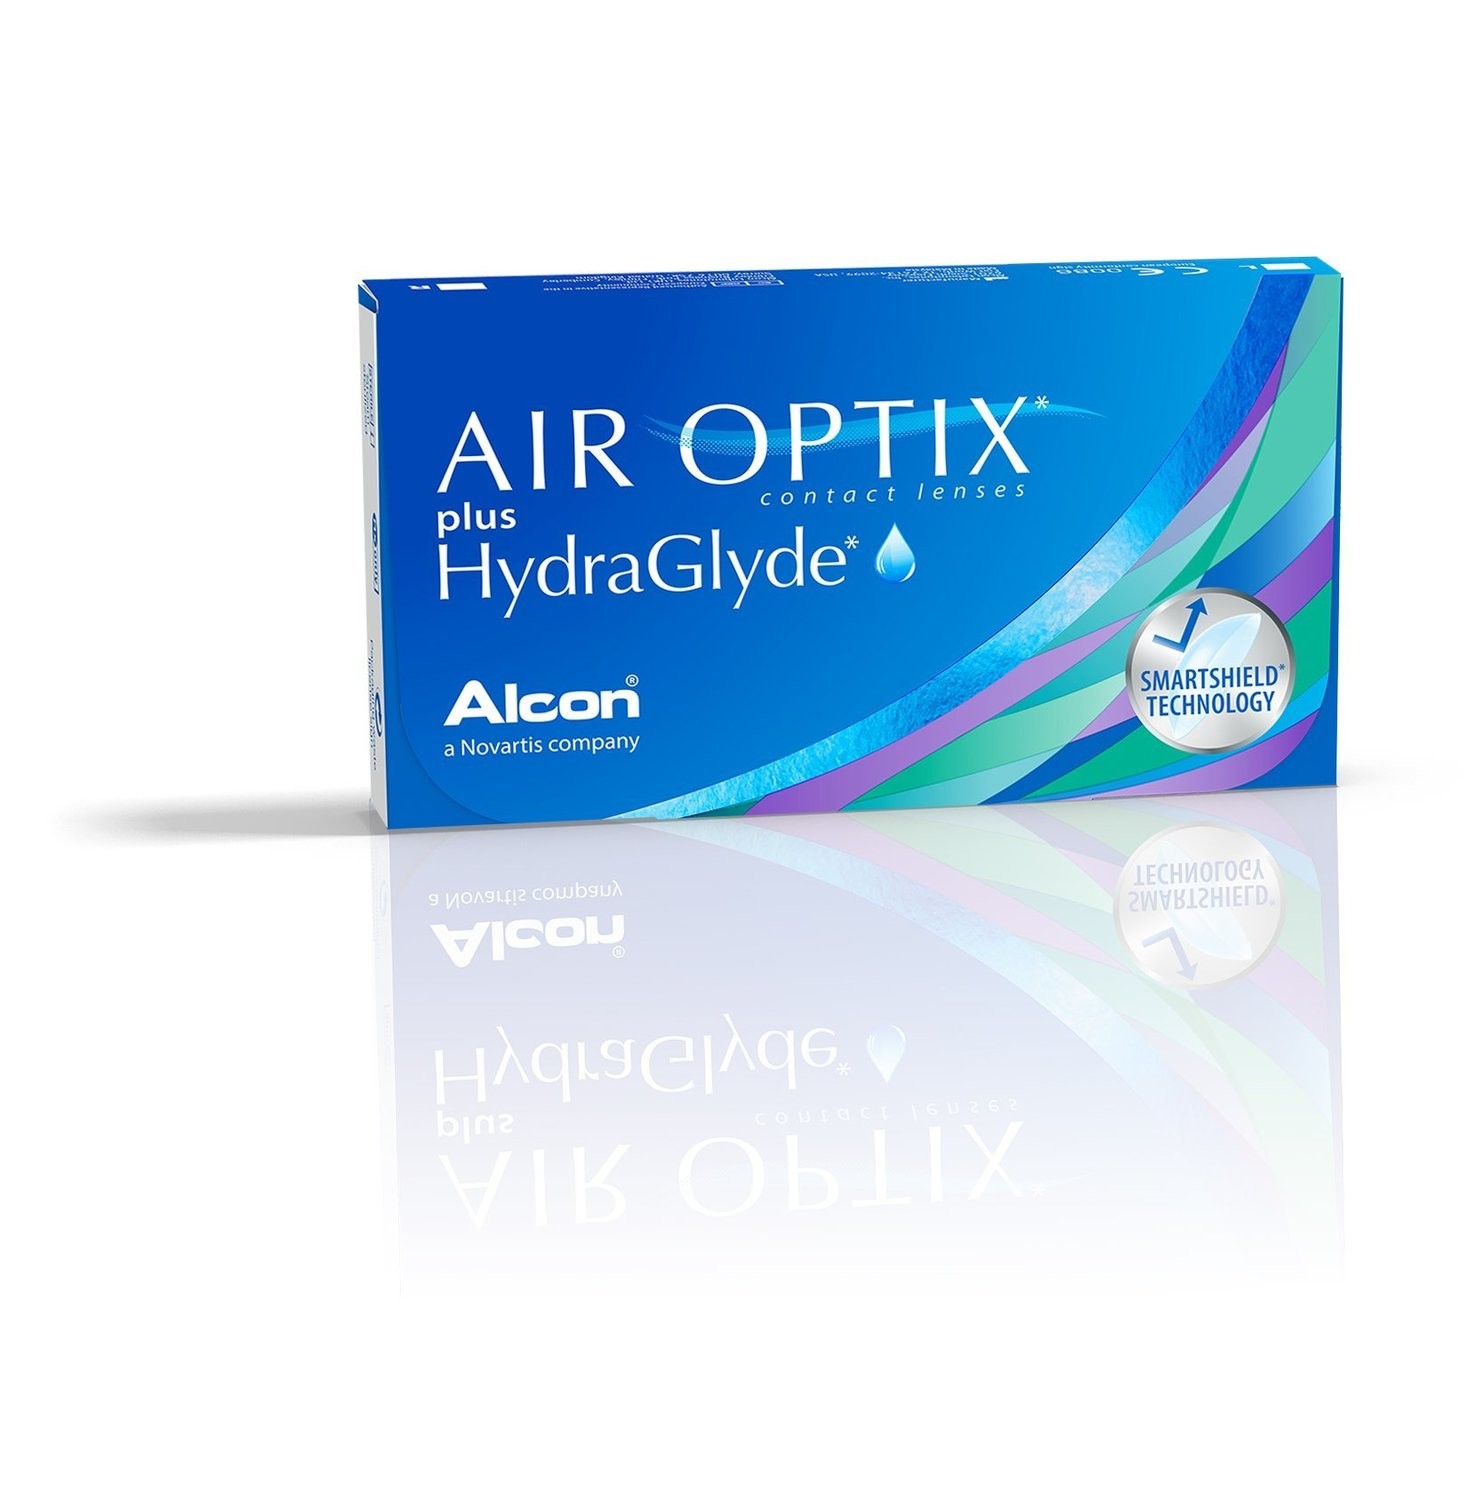 Air Optix plus Hydraglyde (6 pack) by Alcon